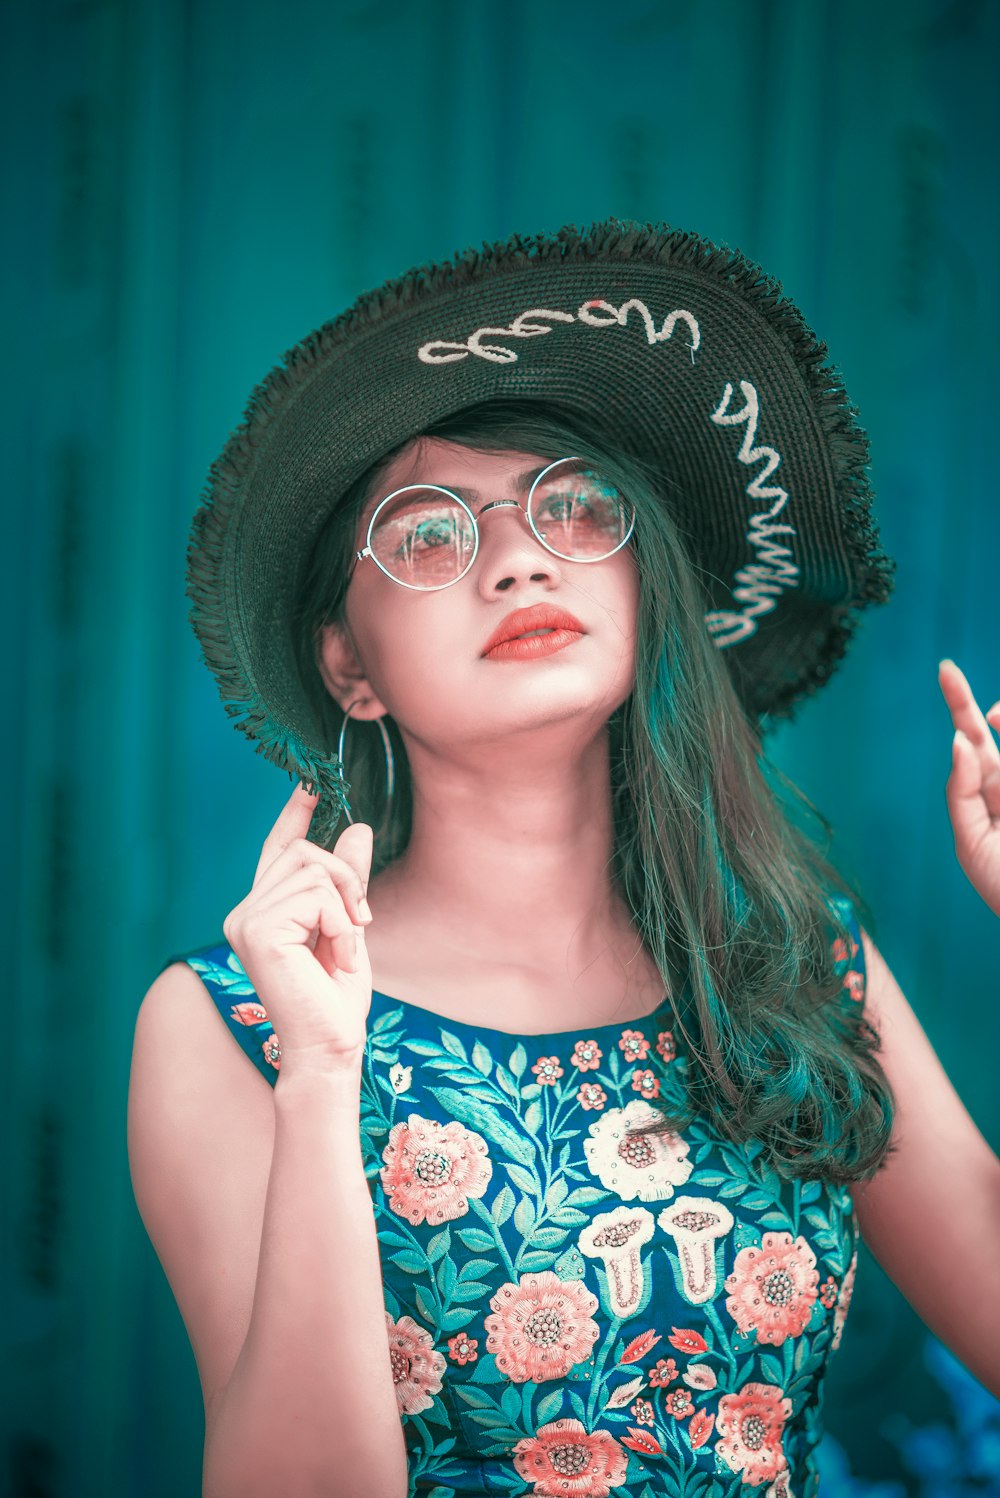 selective focus photography of woman wearing floral dress and black hat